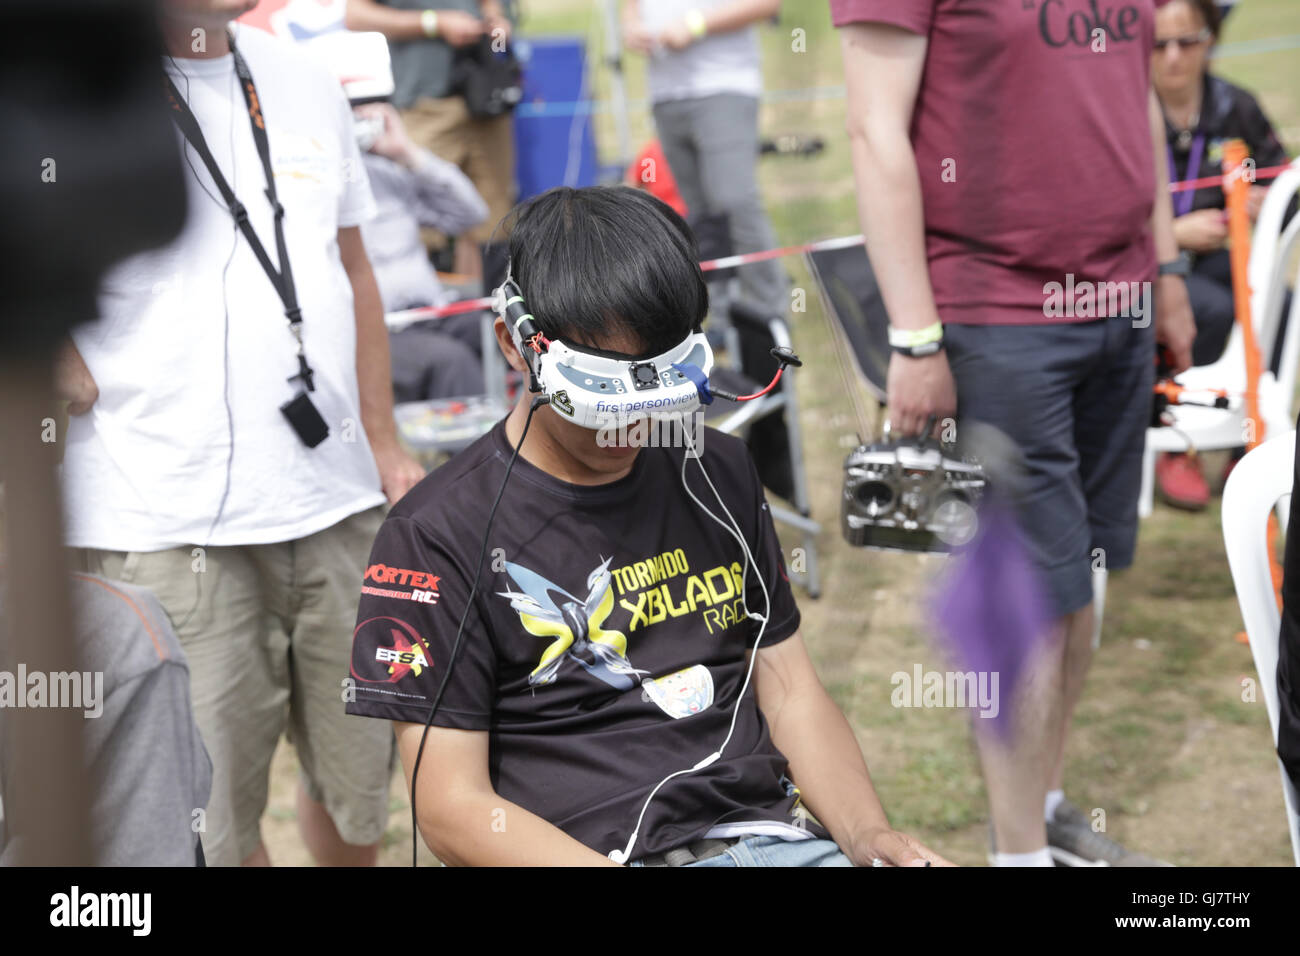 Drone Racing Queen's Cup 2016. Pilot Chi Lau during a race at the UK drone racing competition. Stock Photo